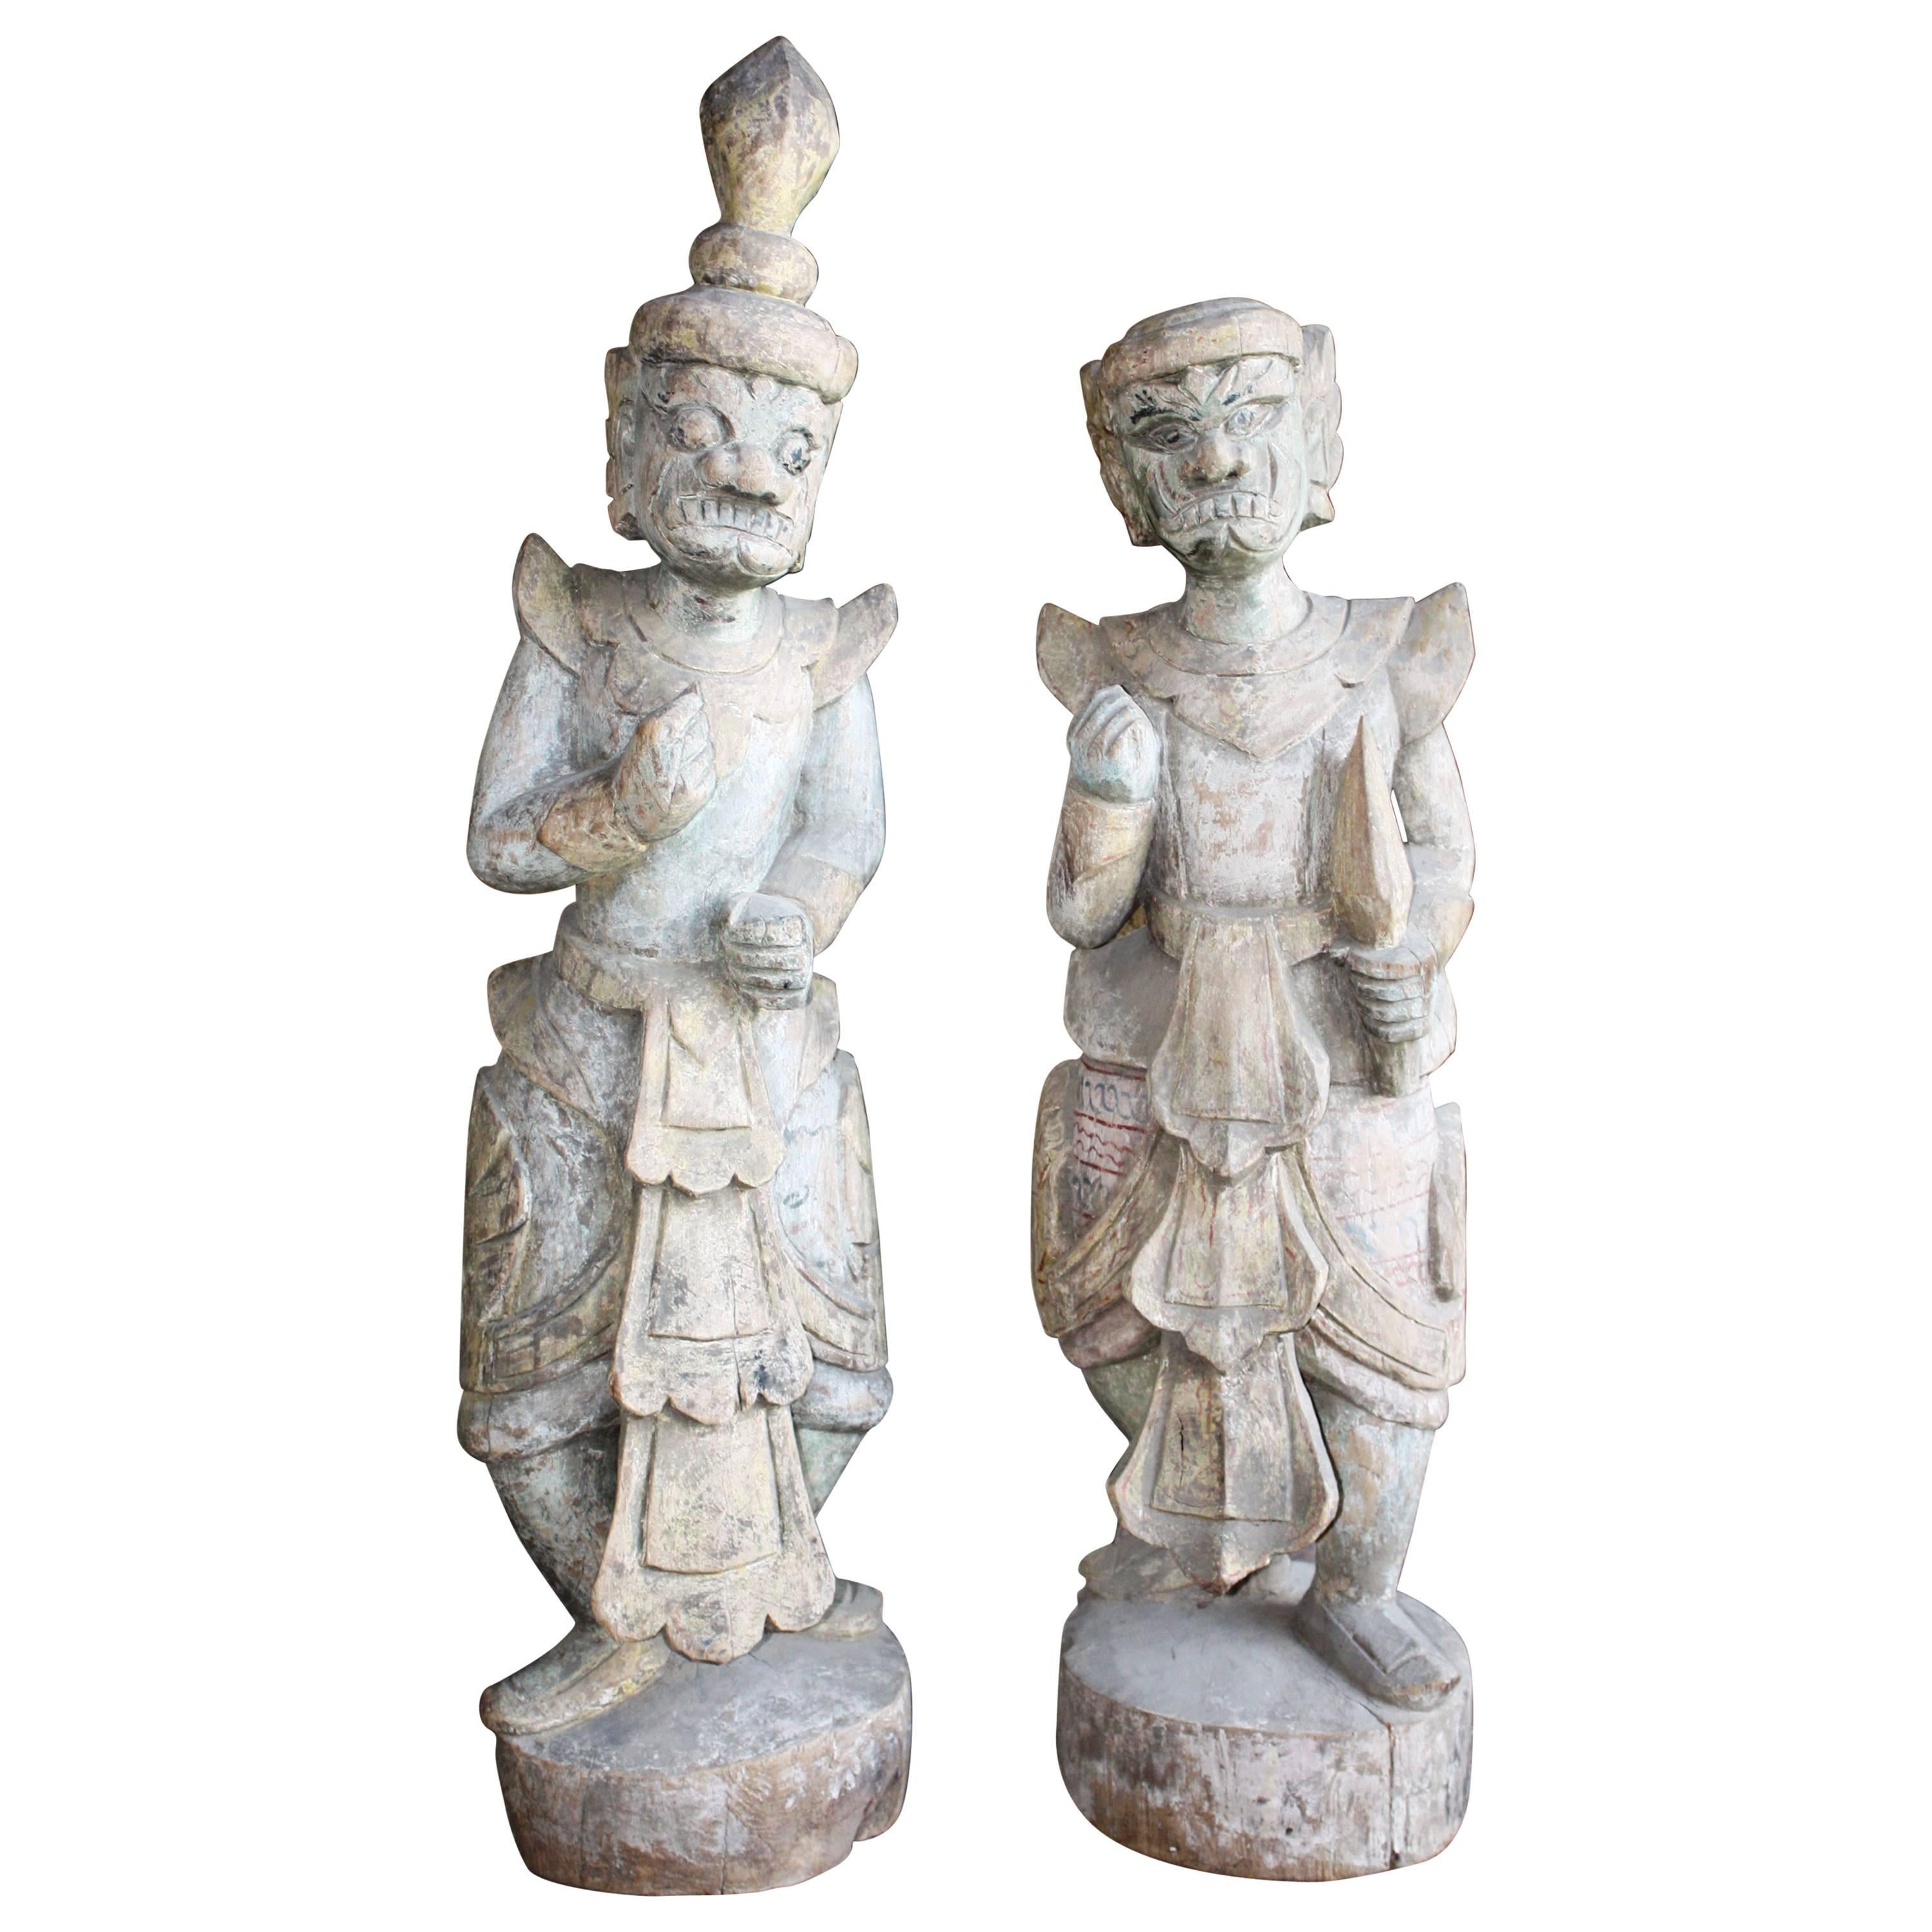 18th Century Pair of Carved Wood Statues, Bali